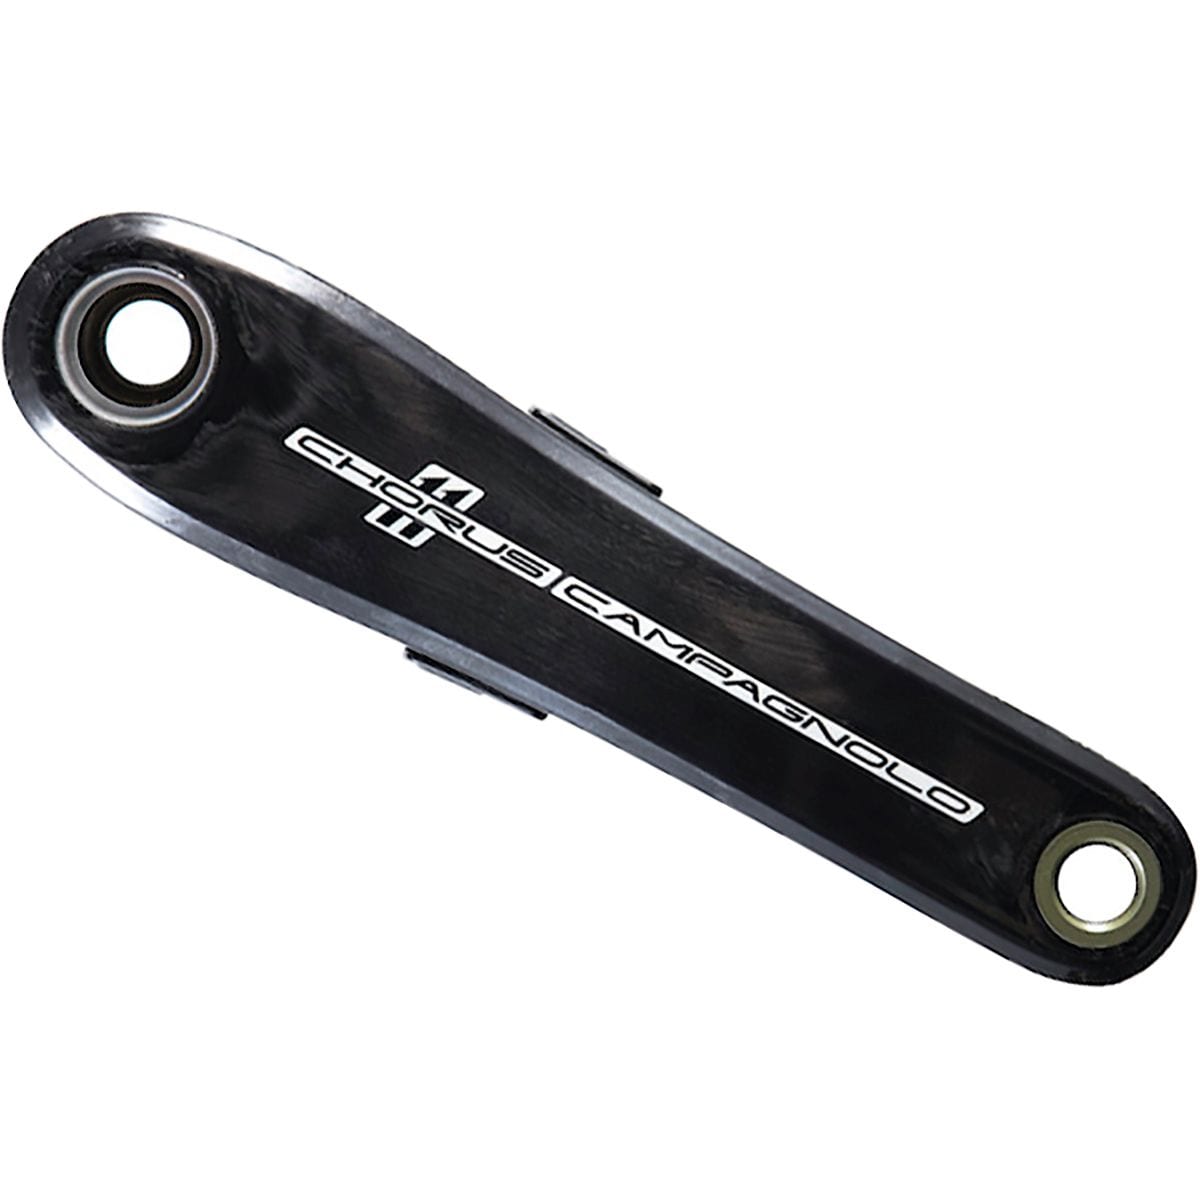 Stages Cycling Campagnolo Chorus L Gen 3 Power Meter Crank Arm